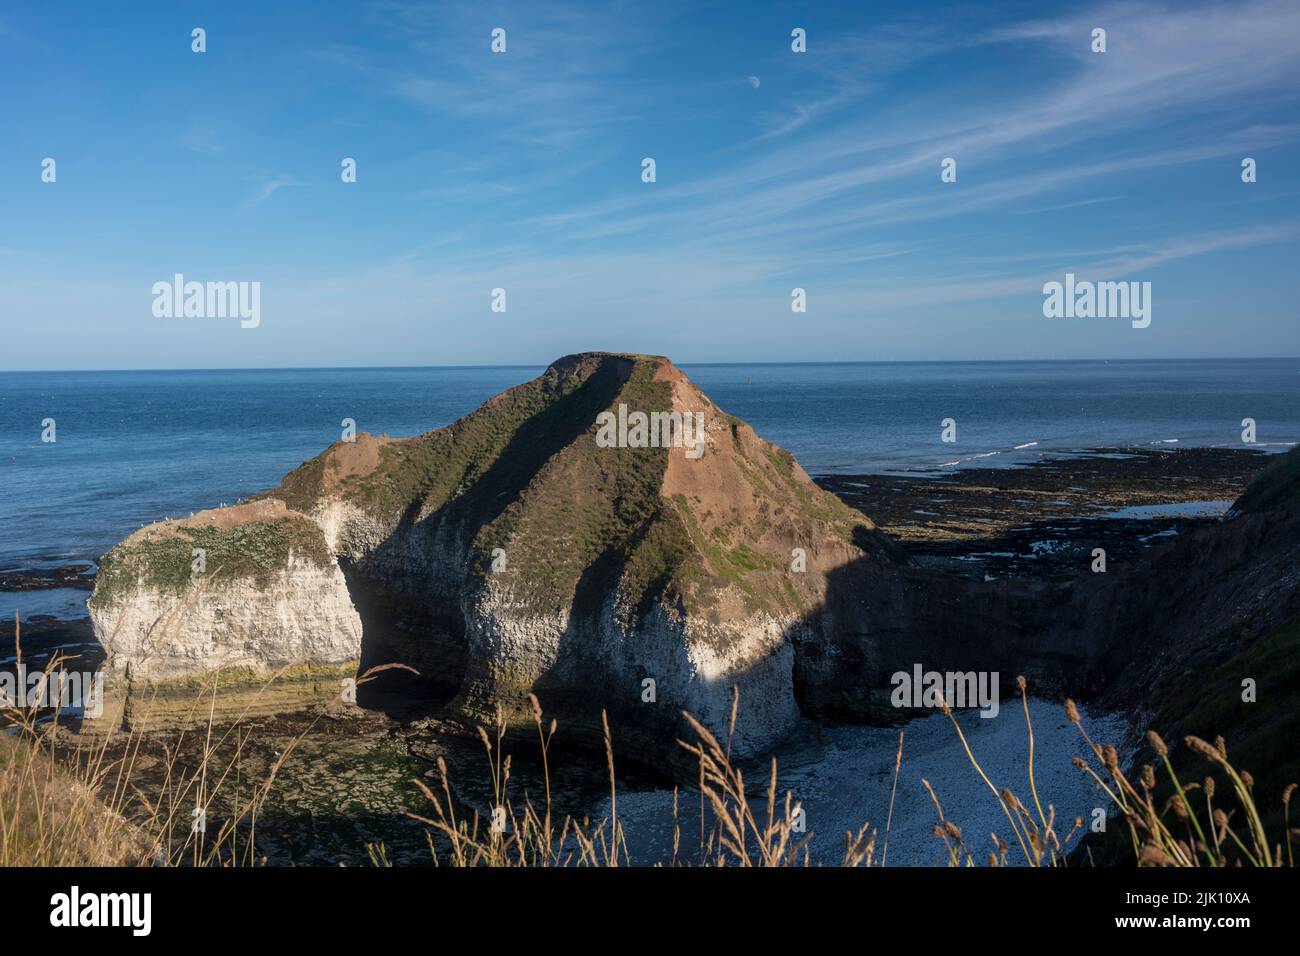 Flamborough Head.  promontory is a raised mass of land that projects into a lowland or a body of water 8 miles long on the East Yorkshire coast. Stock Photo